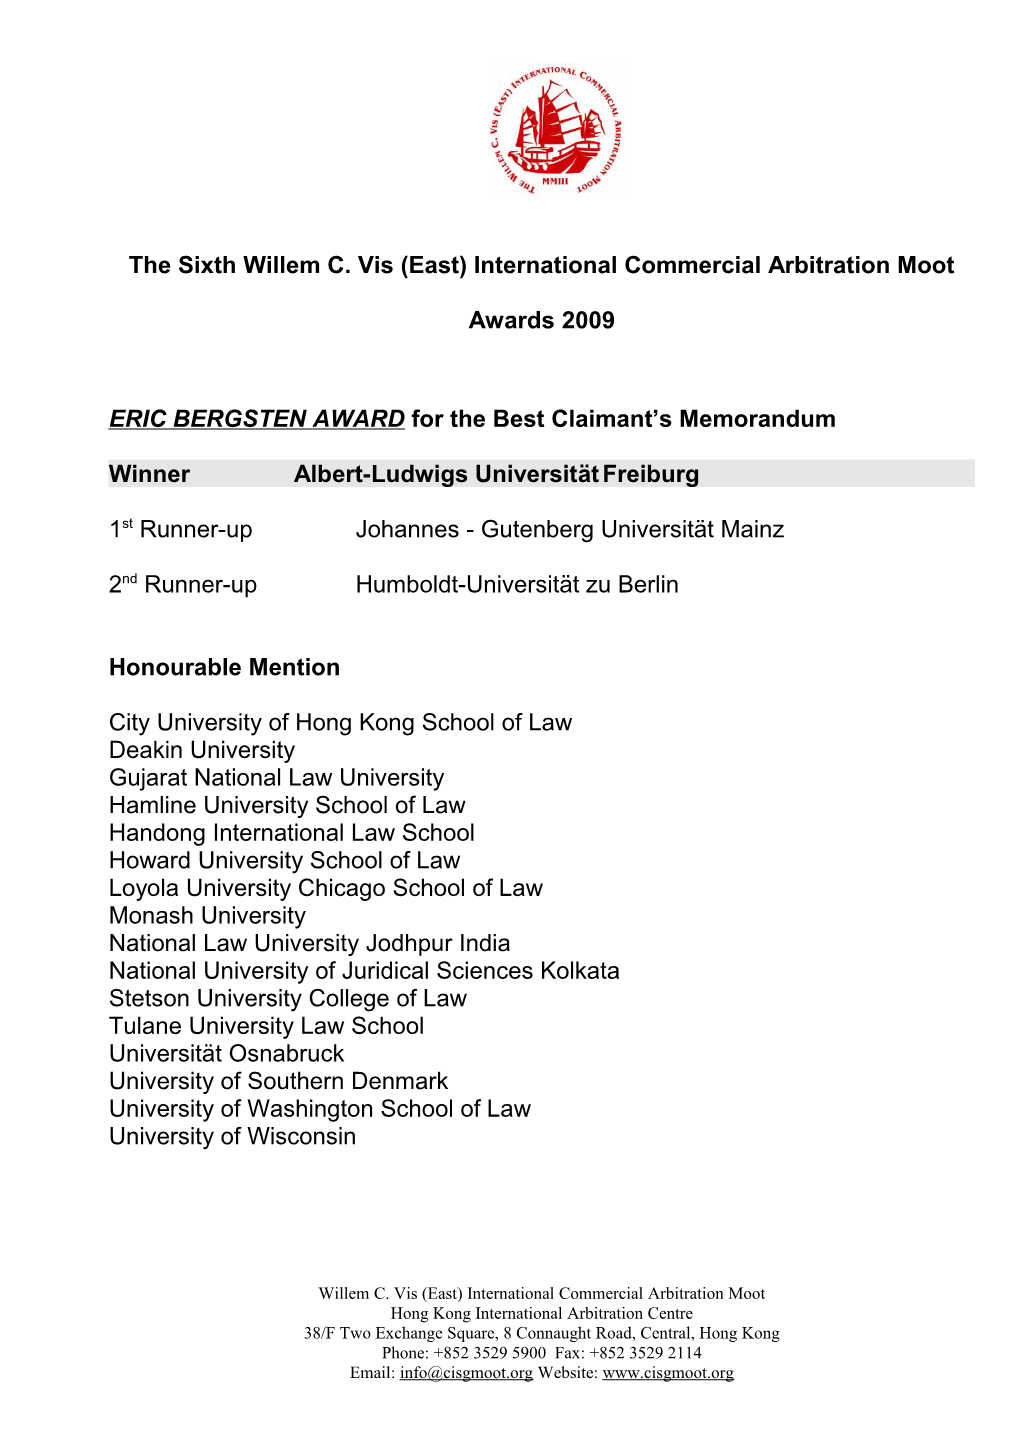 The Sixthwillem C. Vis (East) International Commercial Arbitration Moot